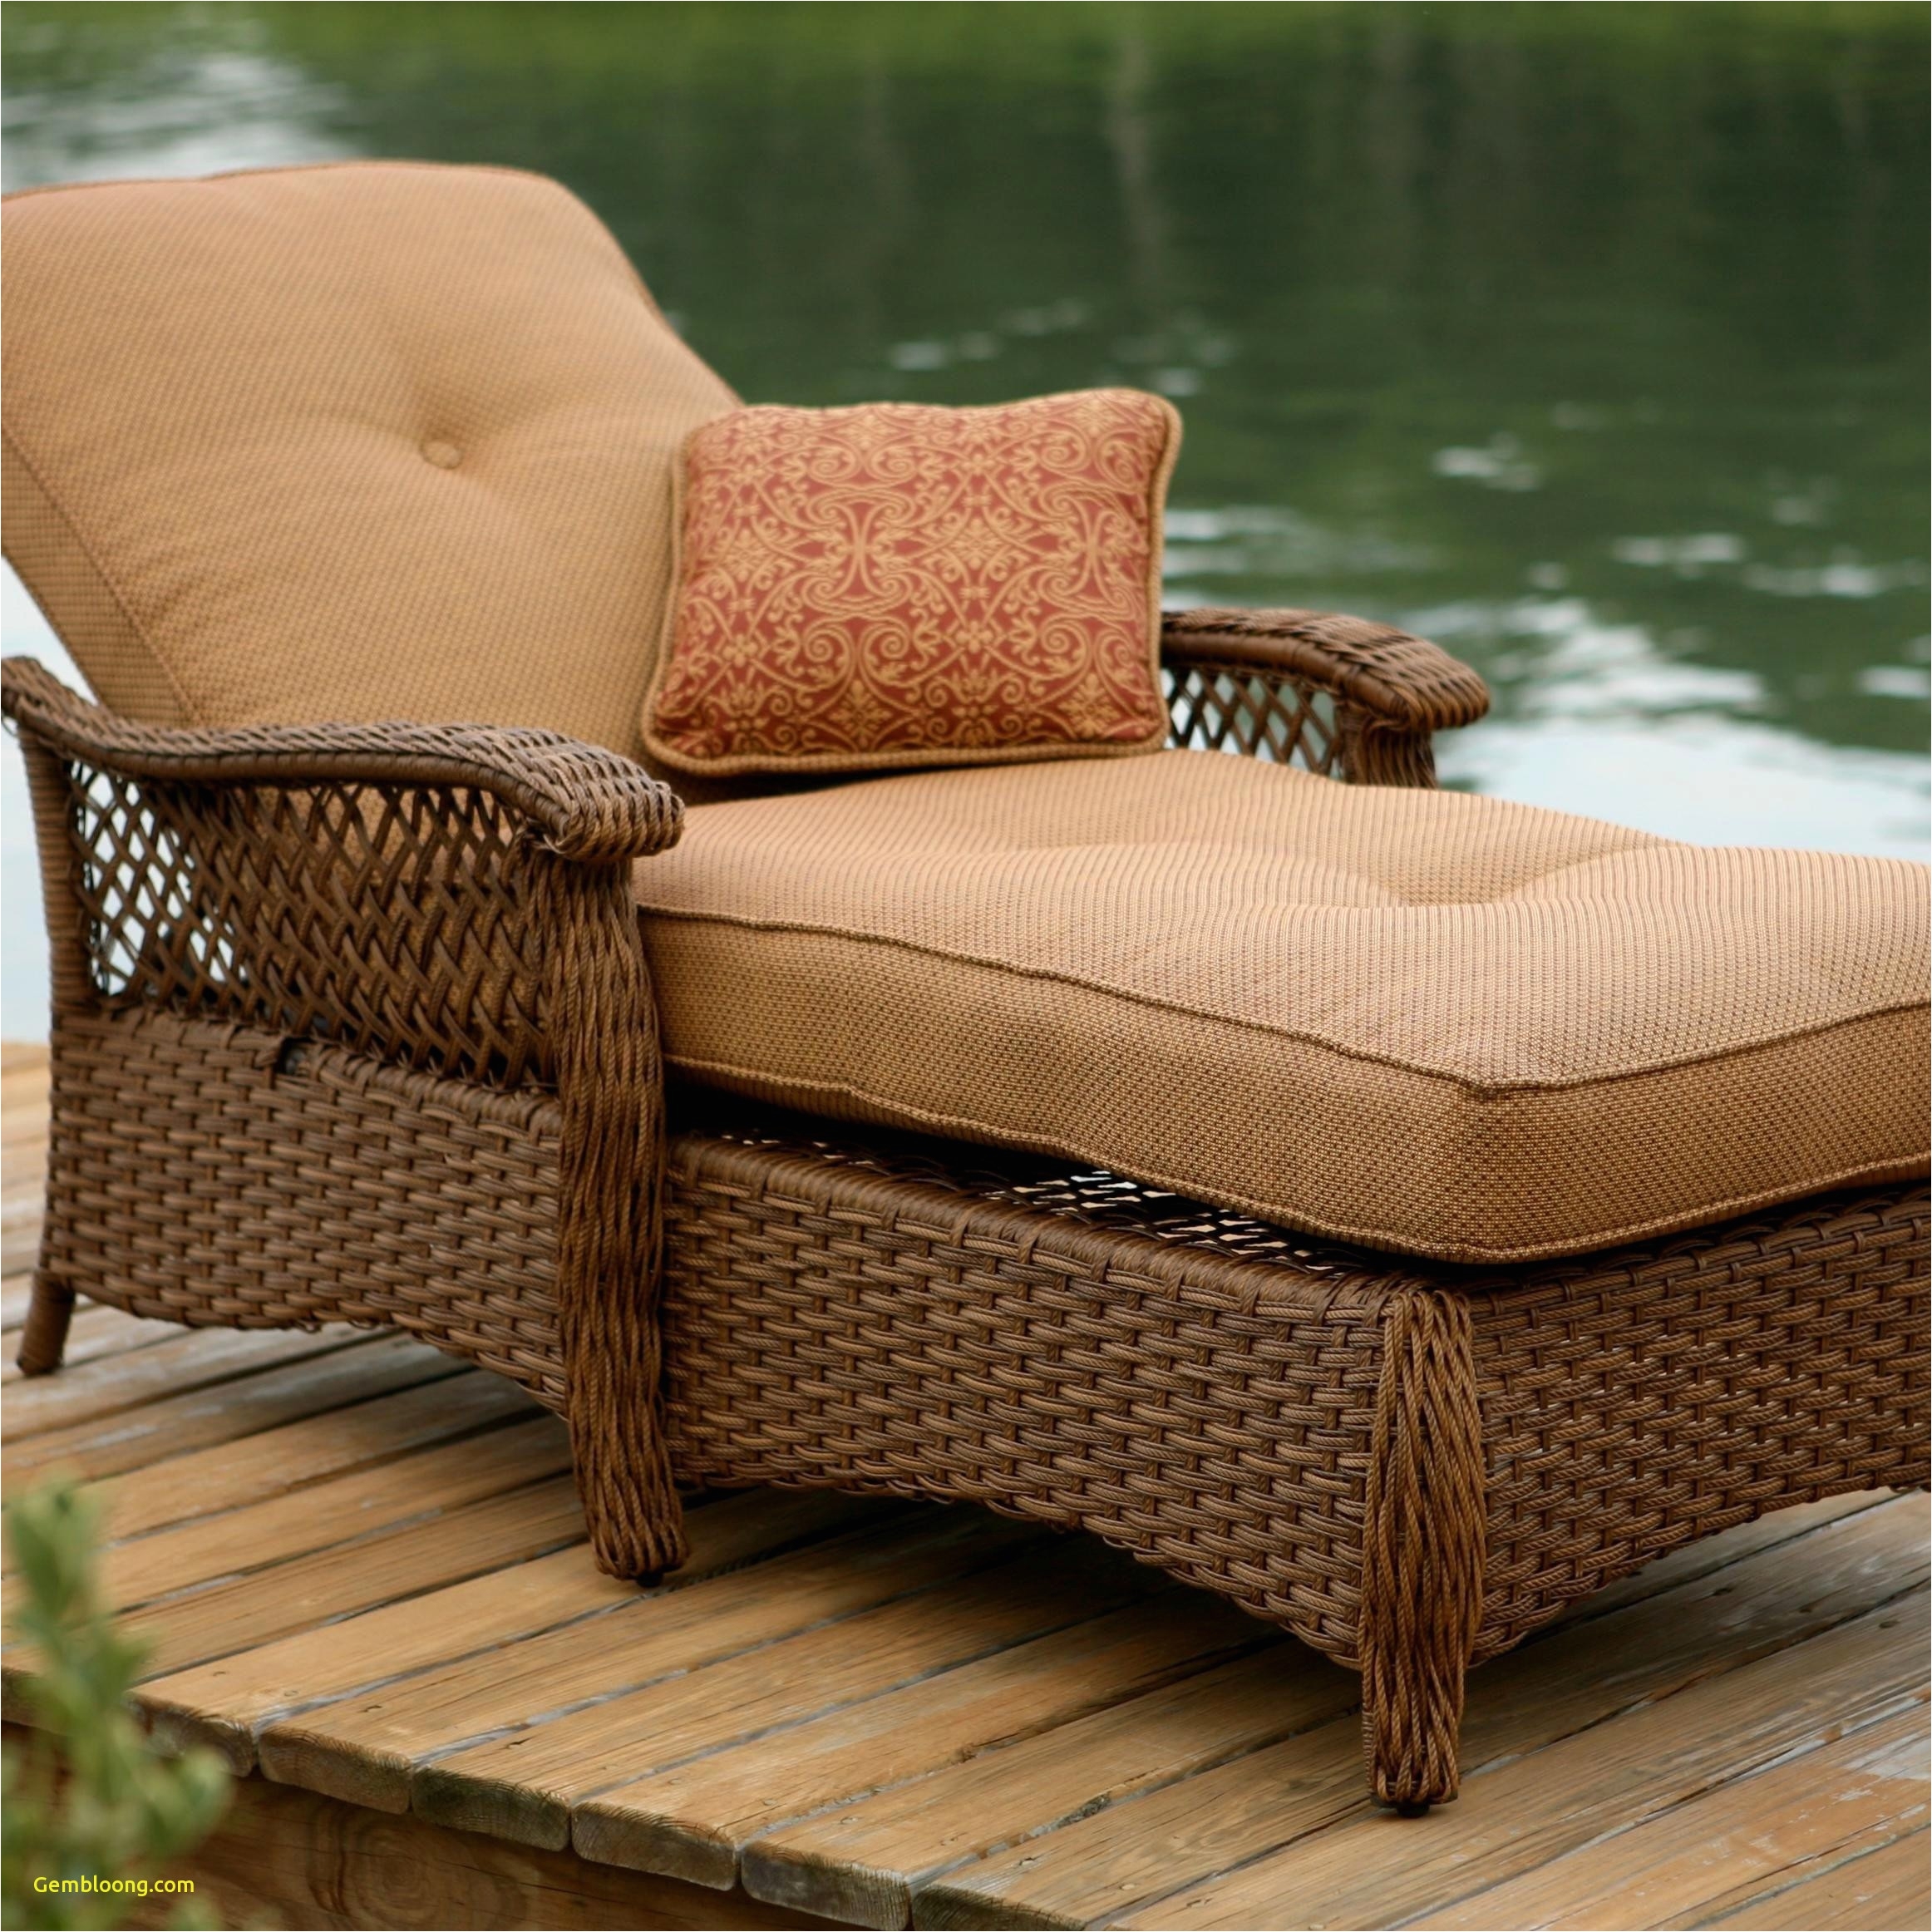 Lowes Resin Outdoor Chairs Home Design Lowes Wicker Patio Furniture Lovely Extraordinary